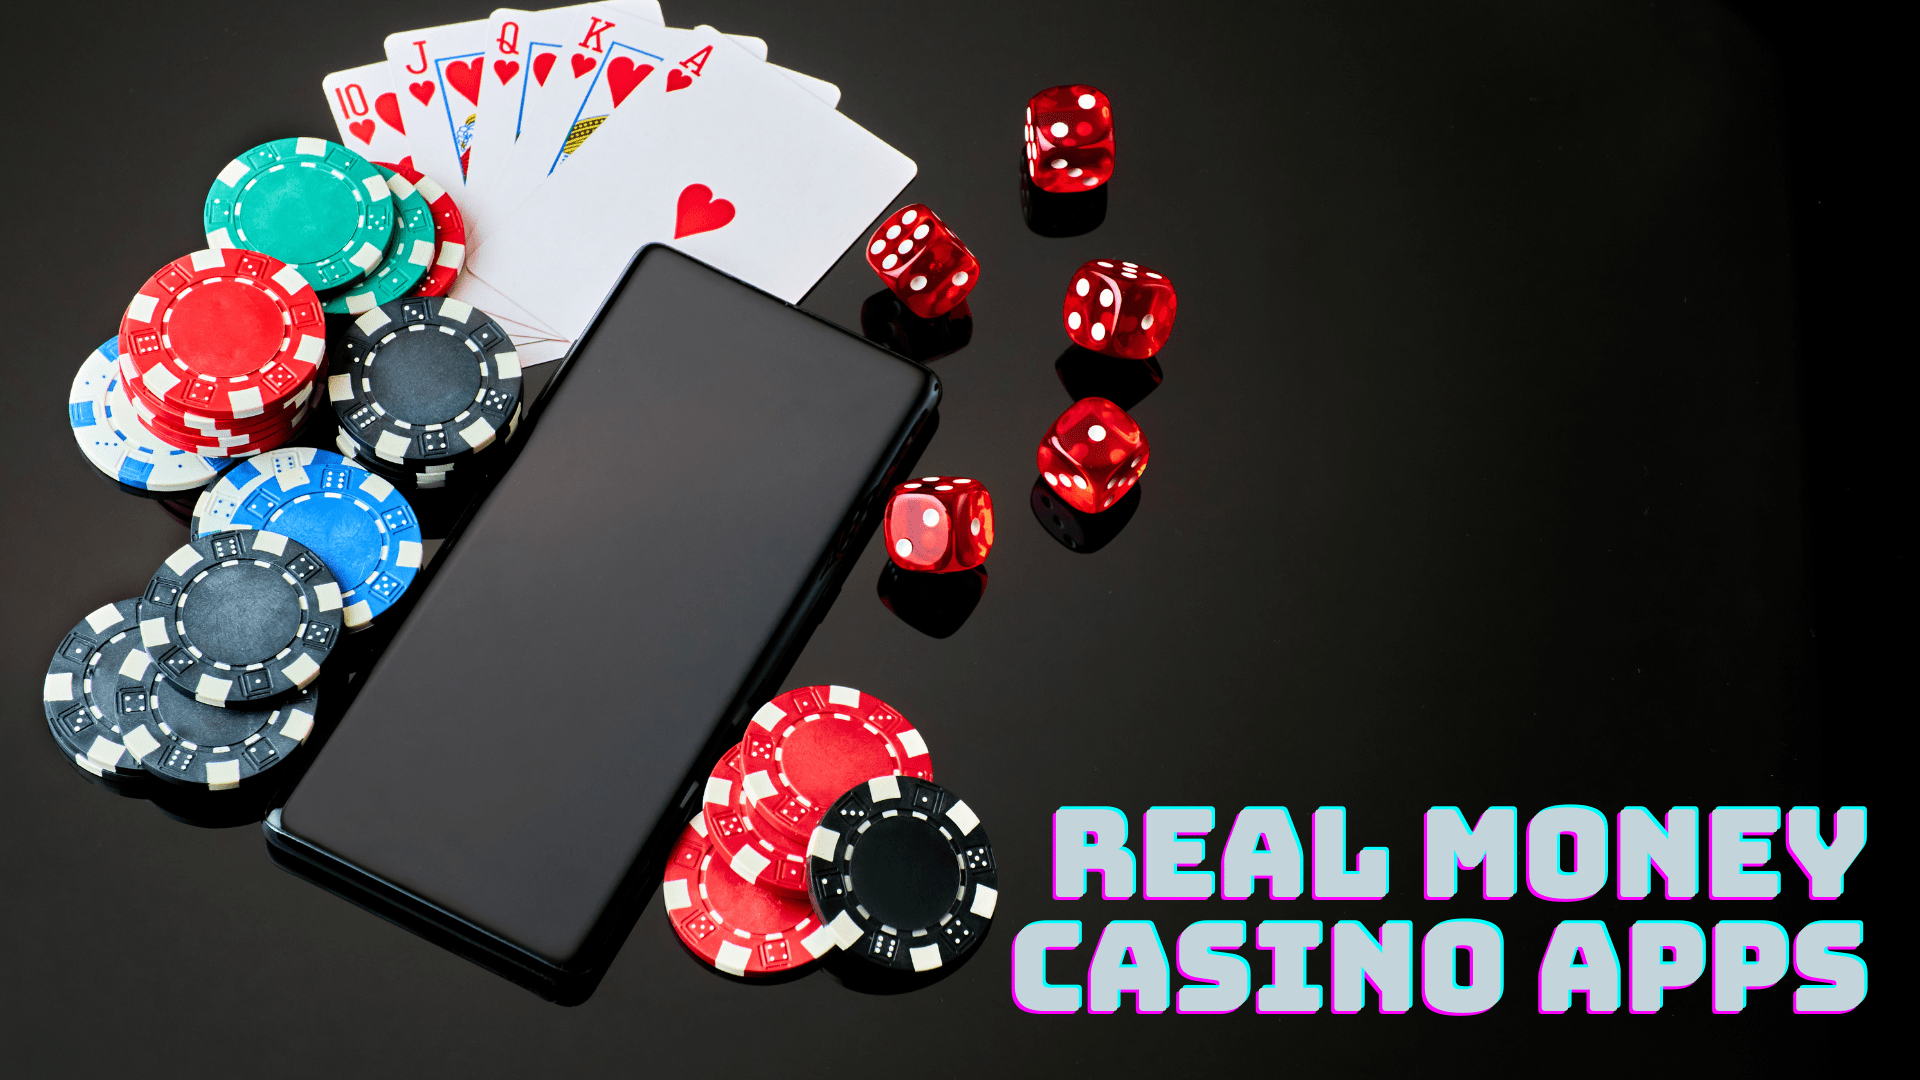 13 Best Casino Apps For Real Money 2023 - Top Mobile Casinos